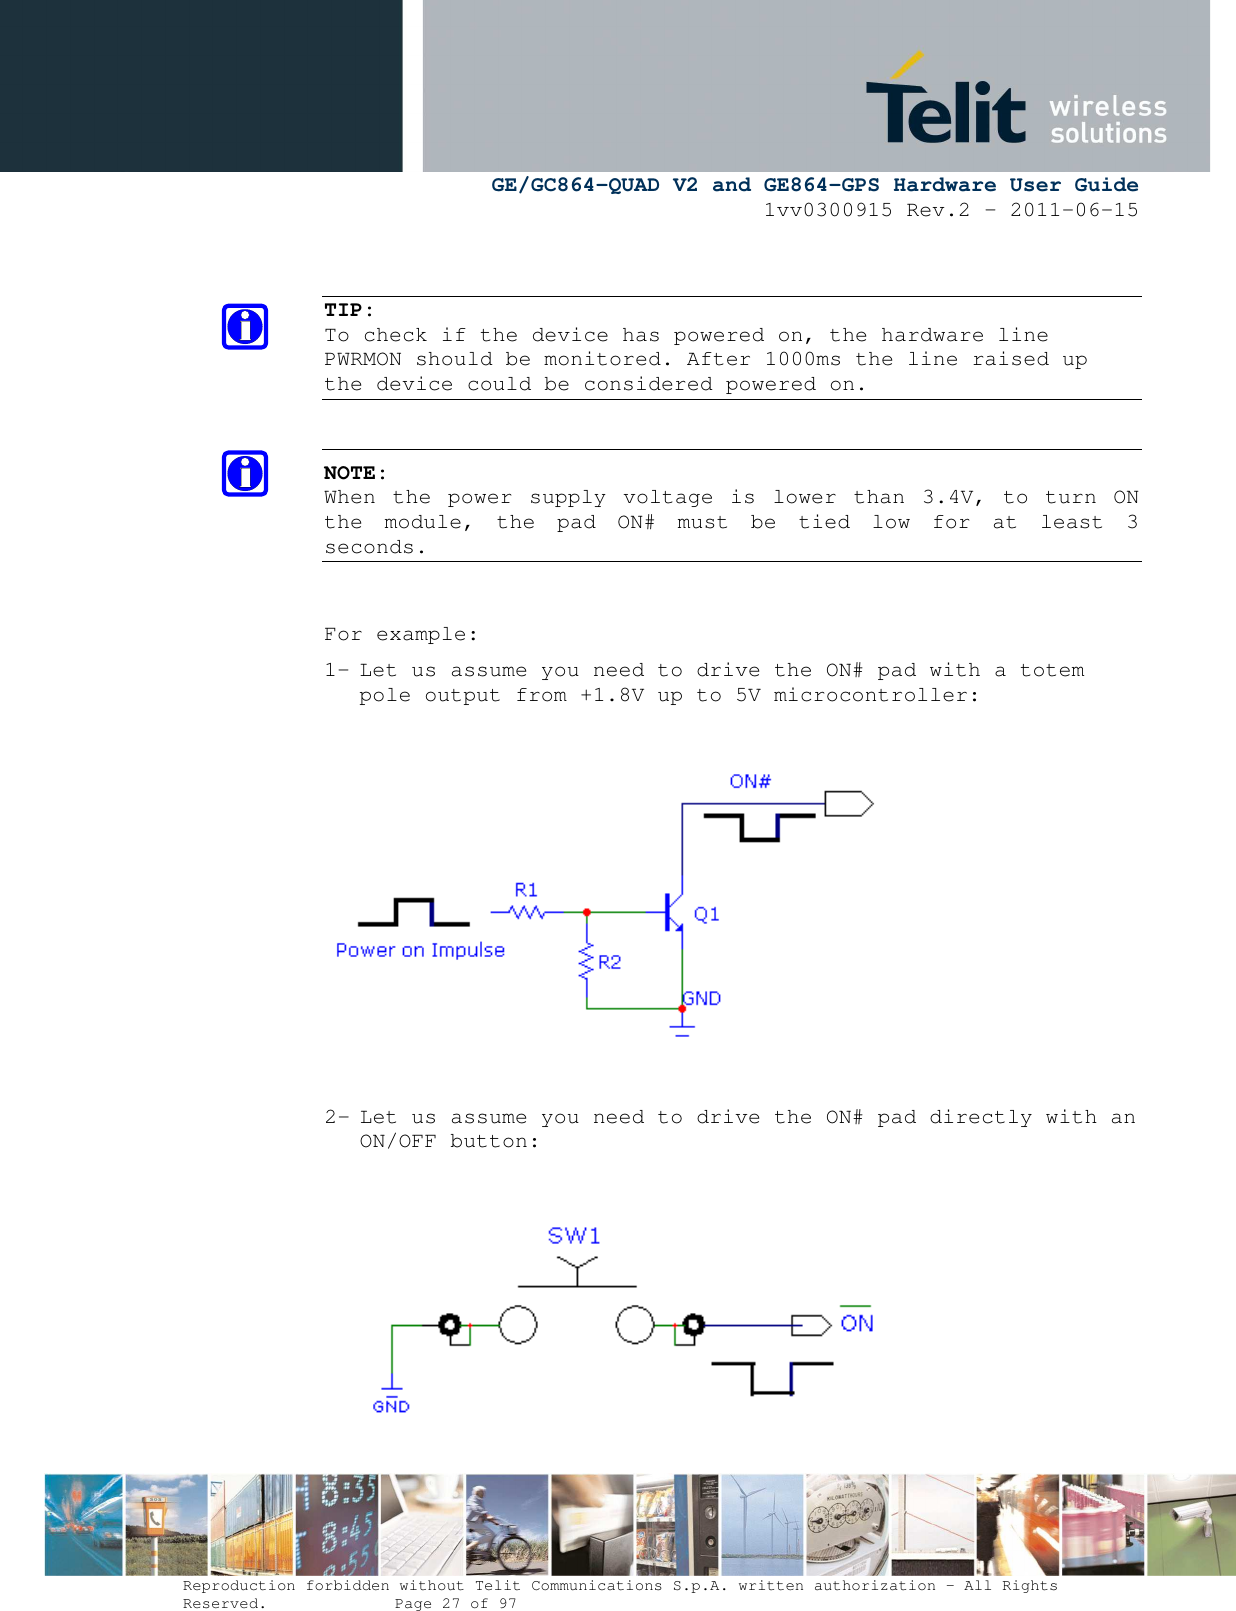      GE/GC864-QUAD V2 and GE864-GPS Hardware User Guide 1vv0300915 Rev.2 – 2011-06-15  Reproduction forbidden without Telit Communications S.p.A. written authorization - All Rights Reserved.    Page 27 of 97    TIP: To check if the device has powered on, the hardware line PWRMON should be monitored. After 1000ms the line raised up the device could be considered powered on.   NOTE:  When  the  power  supply  voltage  is  lower  than  3.4V,  to  turn  ON the  module,  the  pad  ON#  must  be  tied  low  for  at  least  3 seconds.   For example: 1- Let us assume you need to drive the ON# pad with a totem pole output from +1.8V up to 5V microcontroller:    2- Let us assume you need to drive the ON# pad directly with an ON/OFF button:        